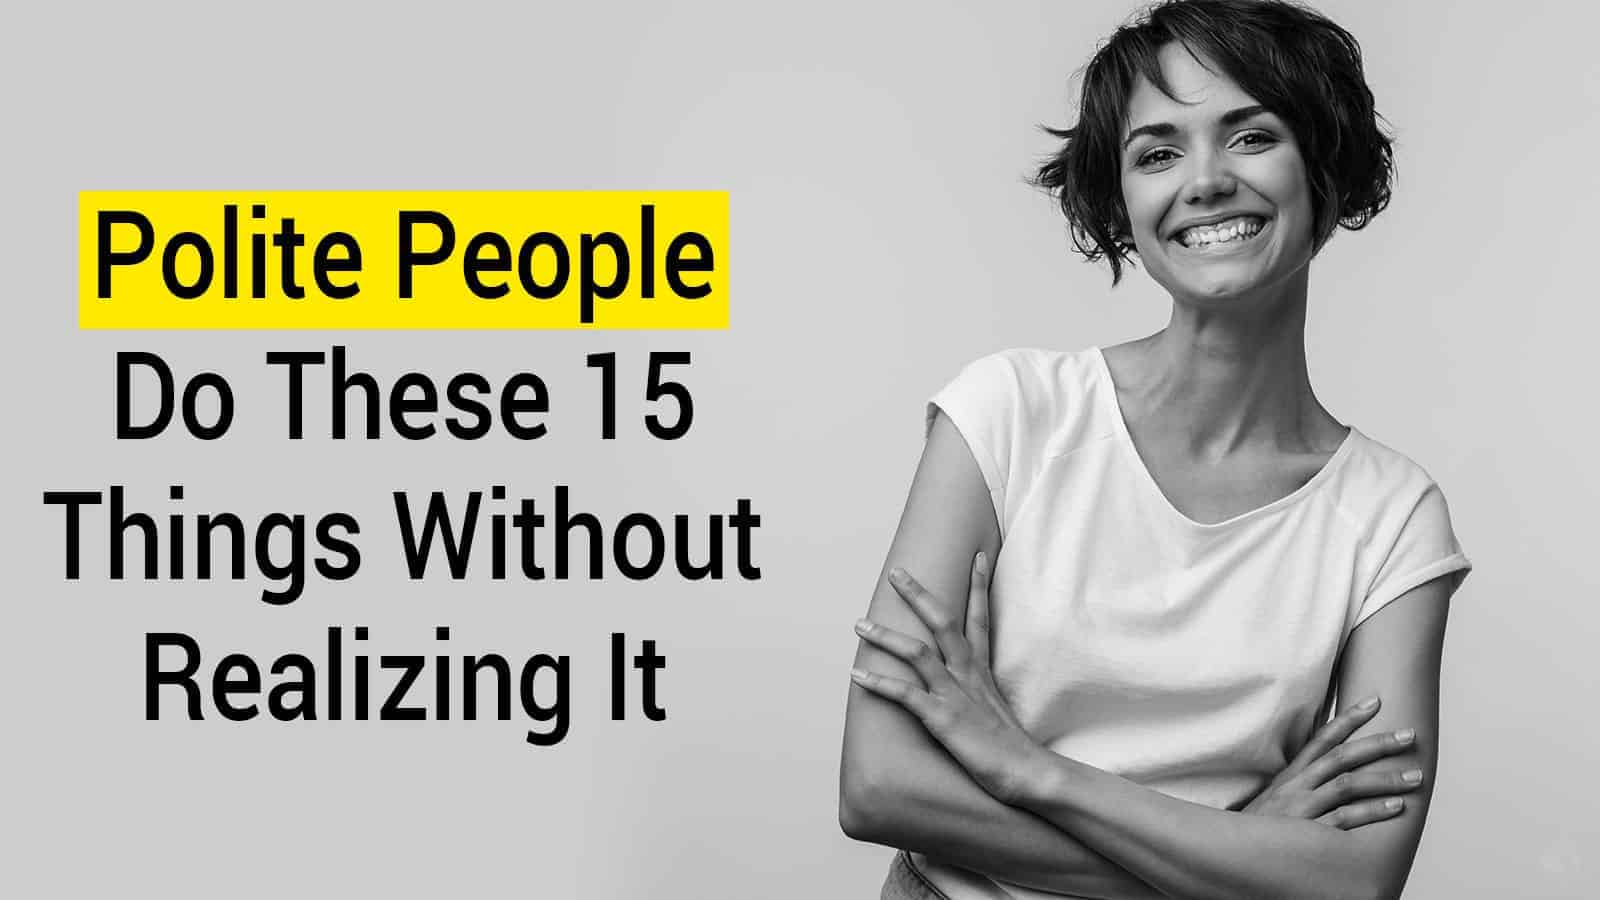 Polite People Do These 15 Things Without Realizing It